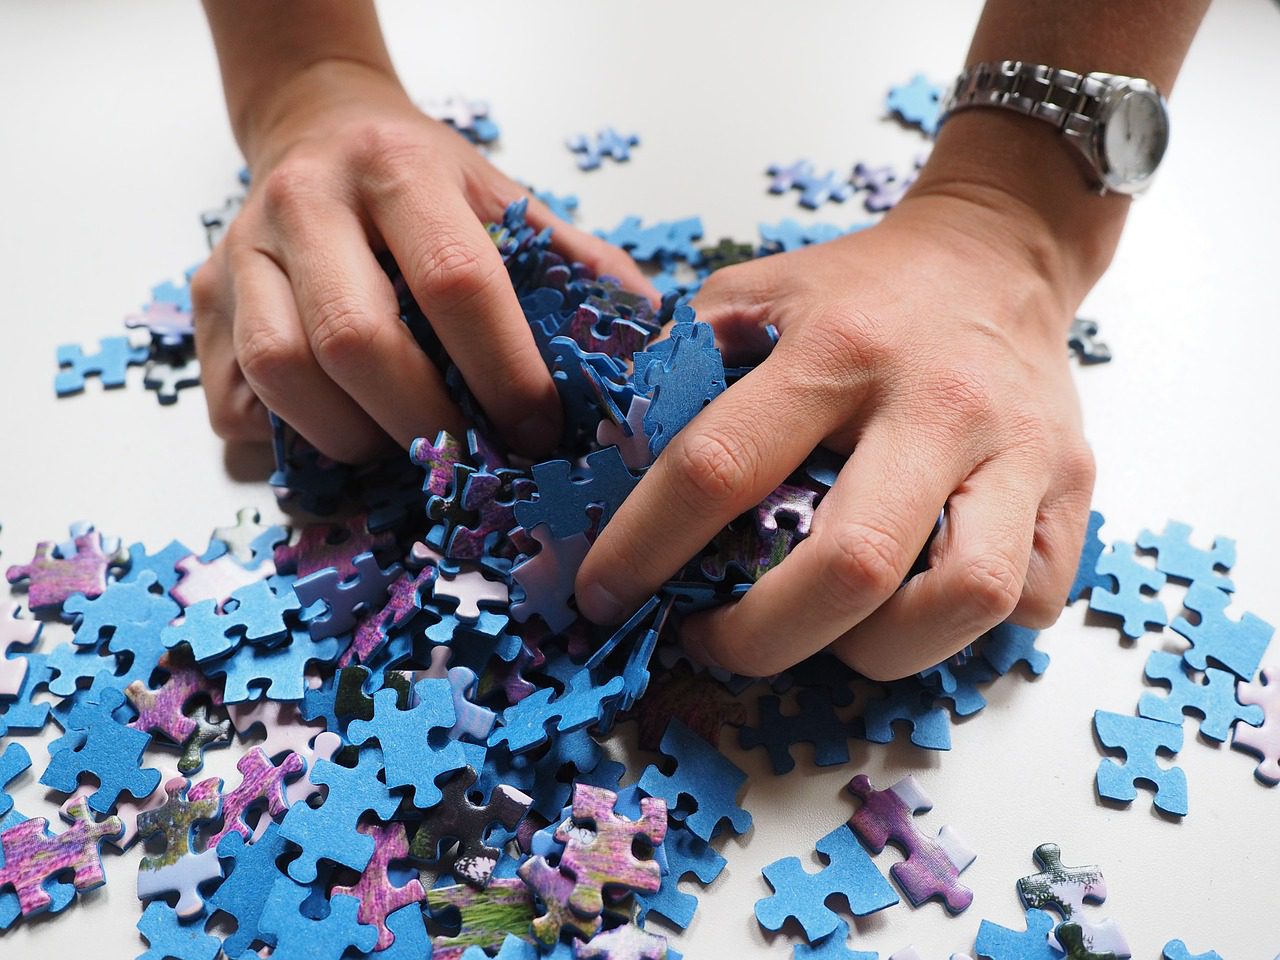 Two Hands Grabbing Several Jigsaw Puzzle Pieces